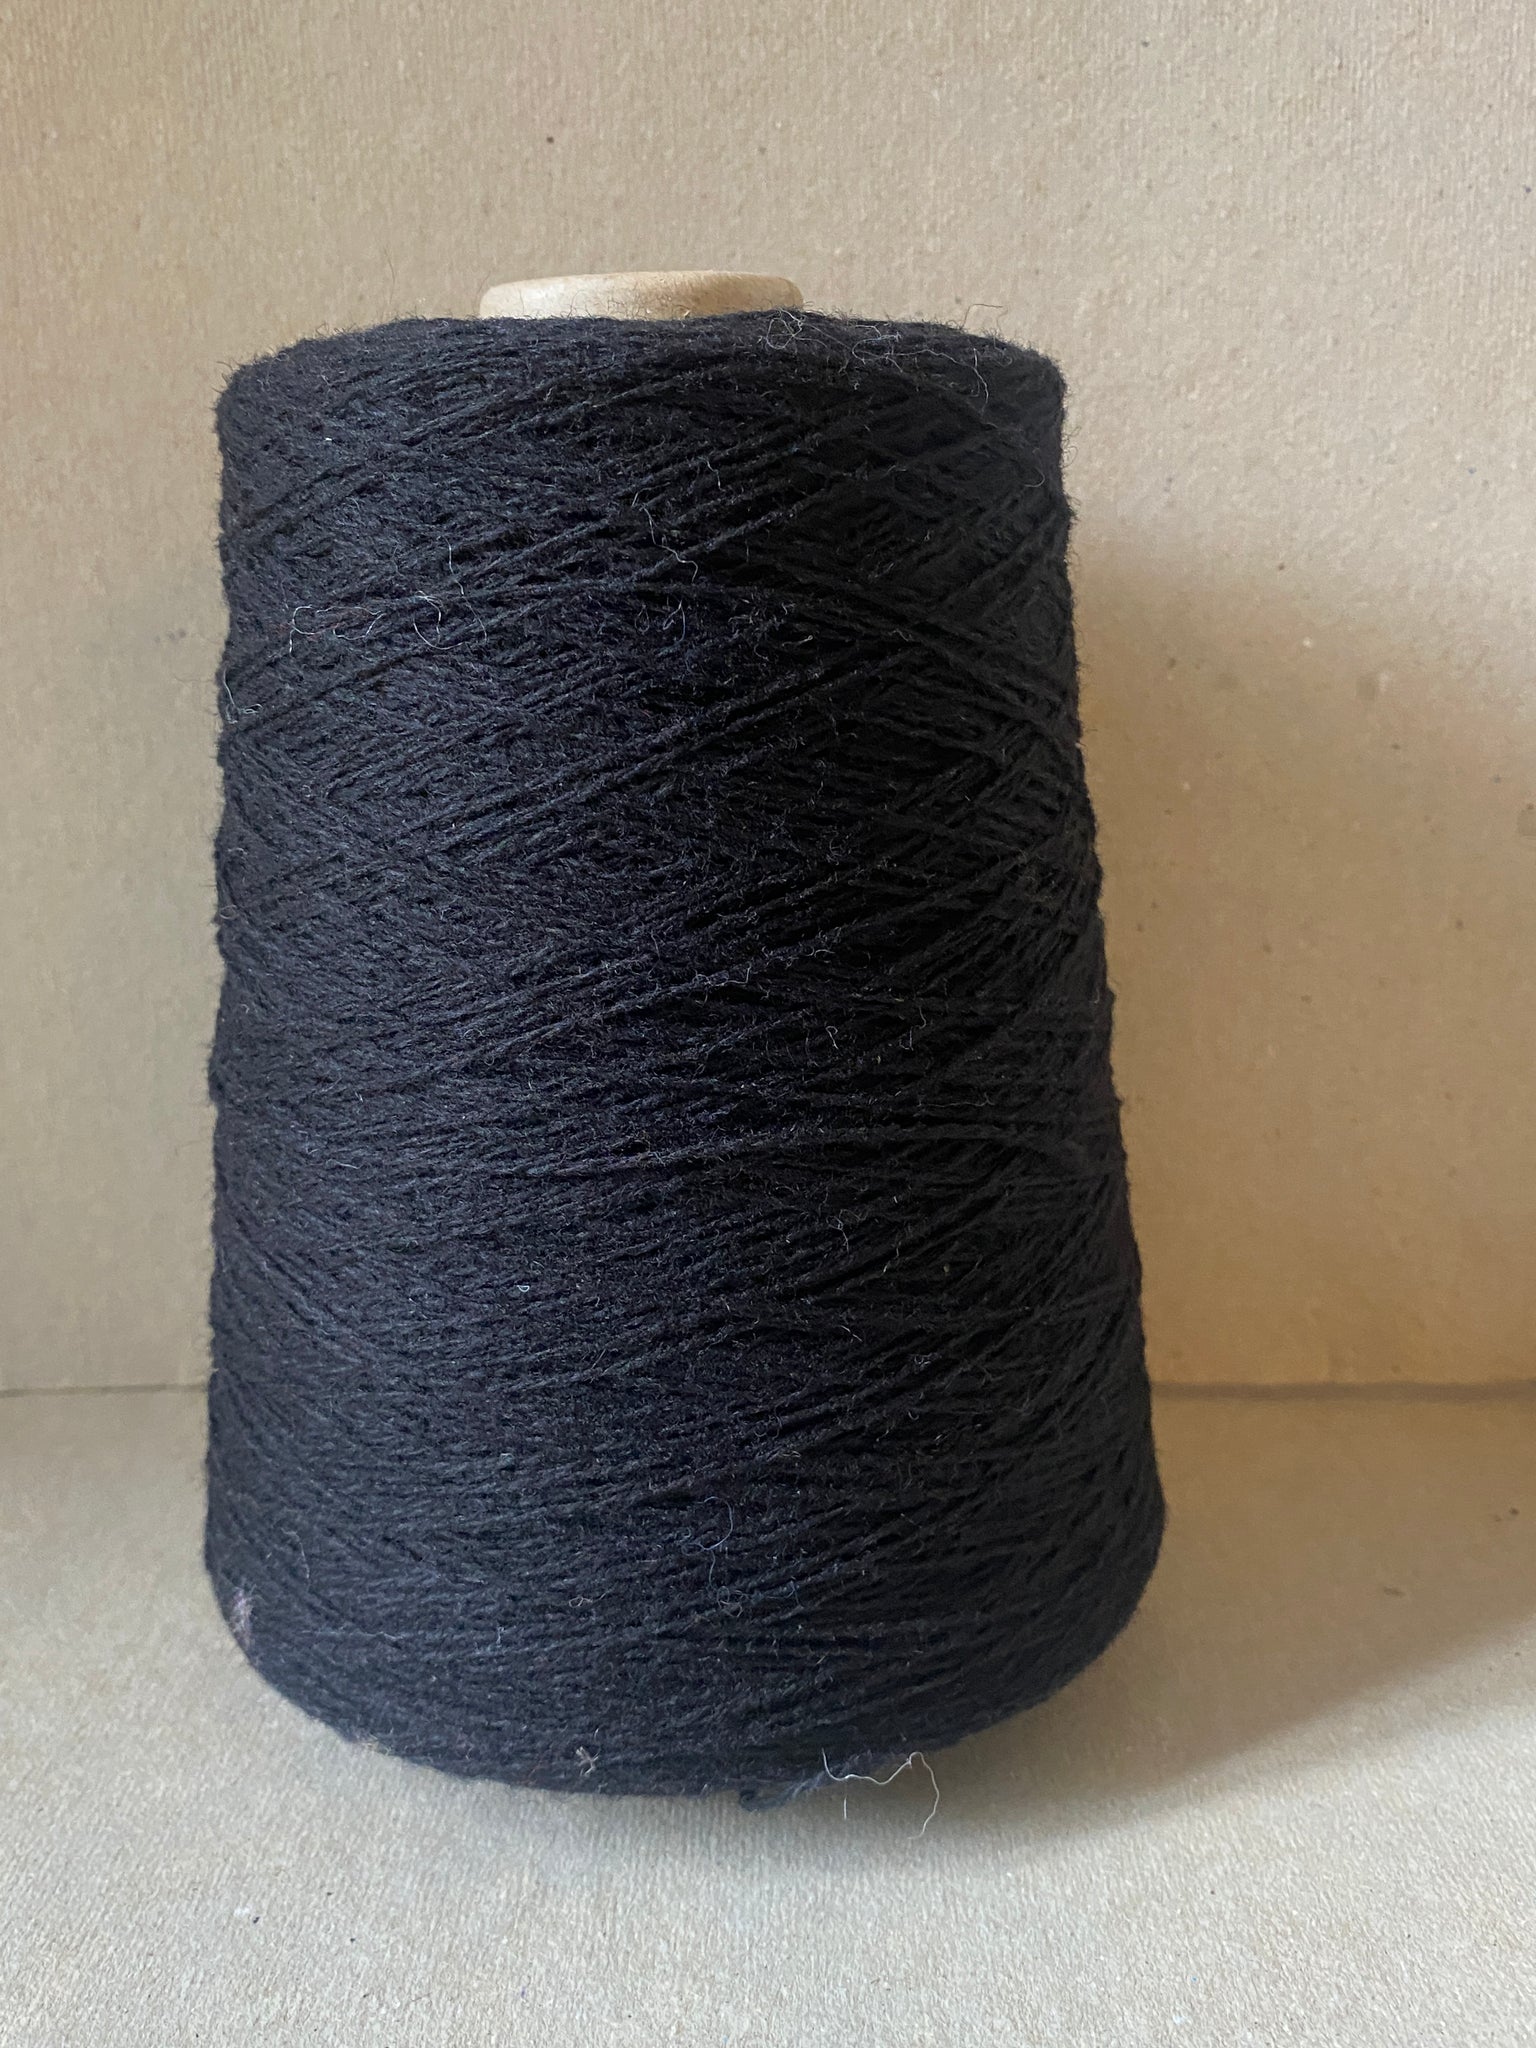 2 Ply Pure New Wool - Obsidian